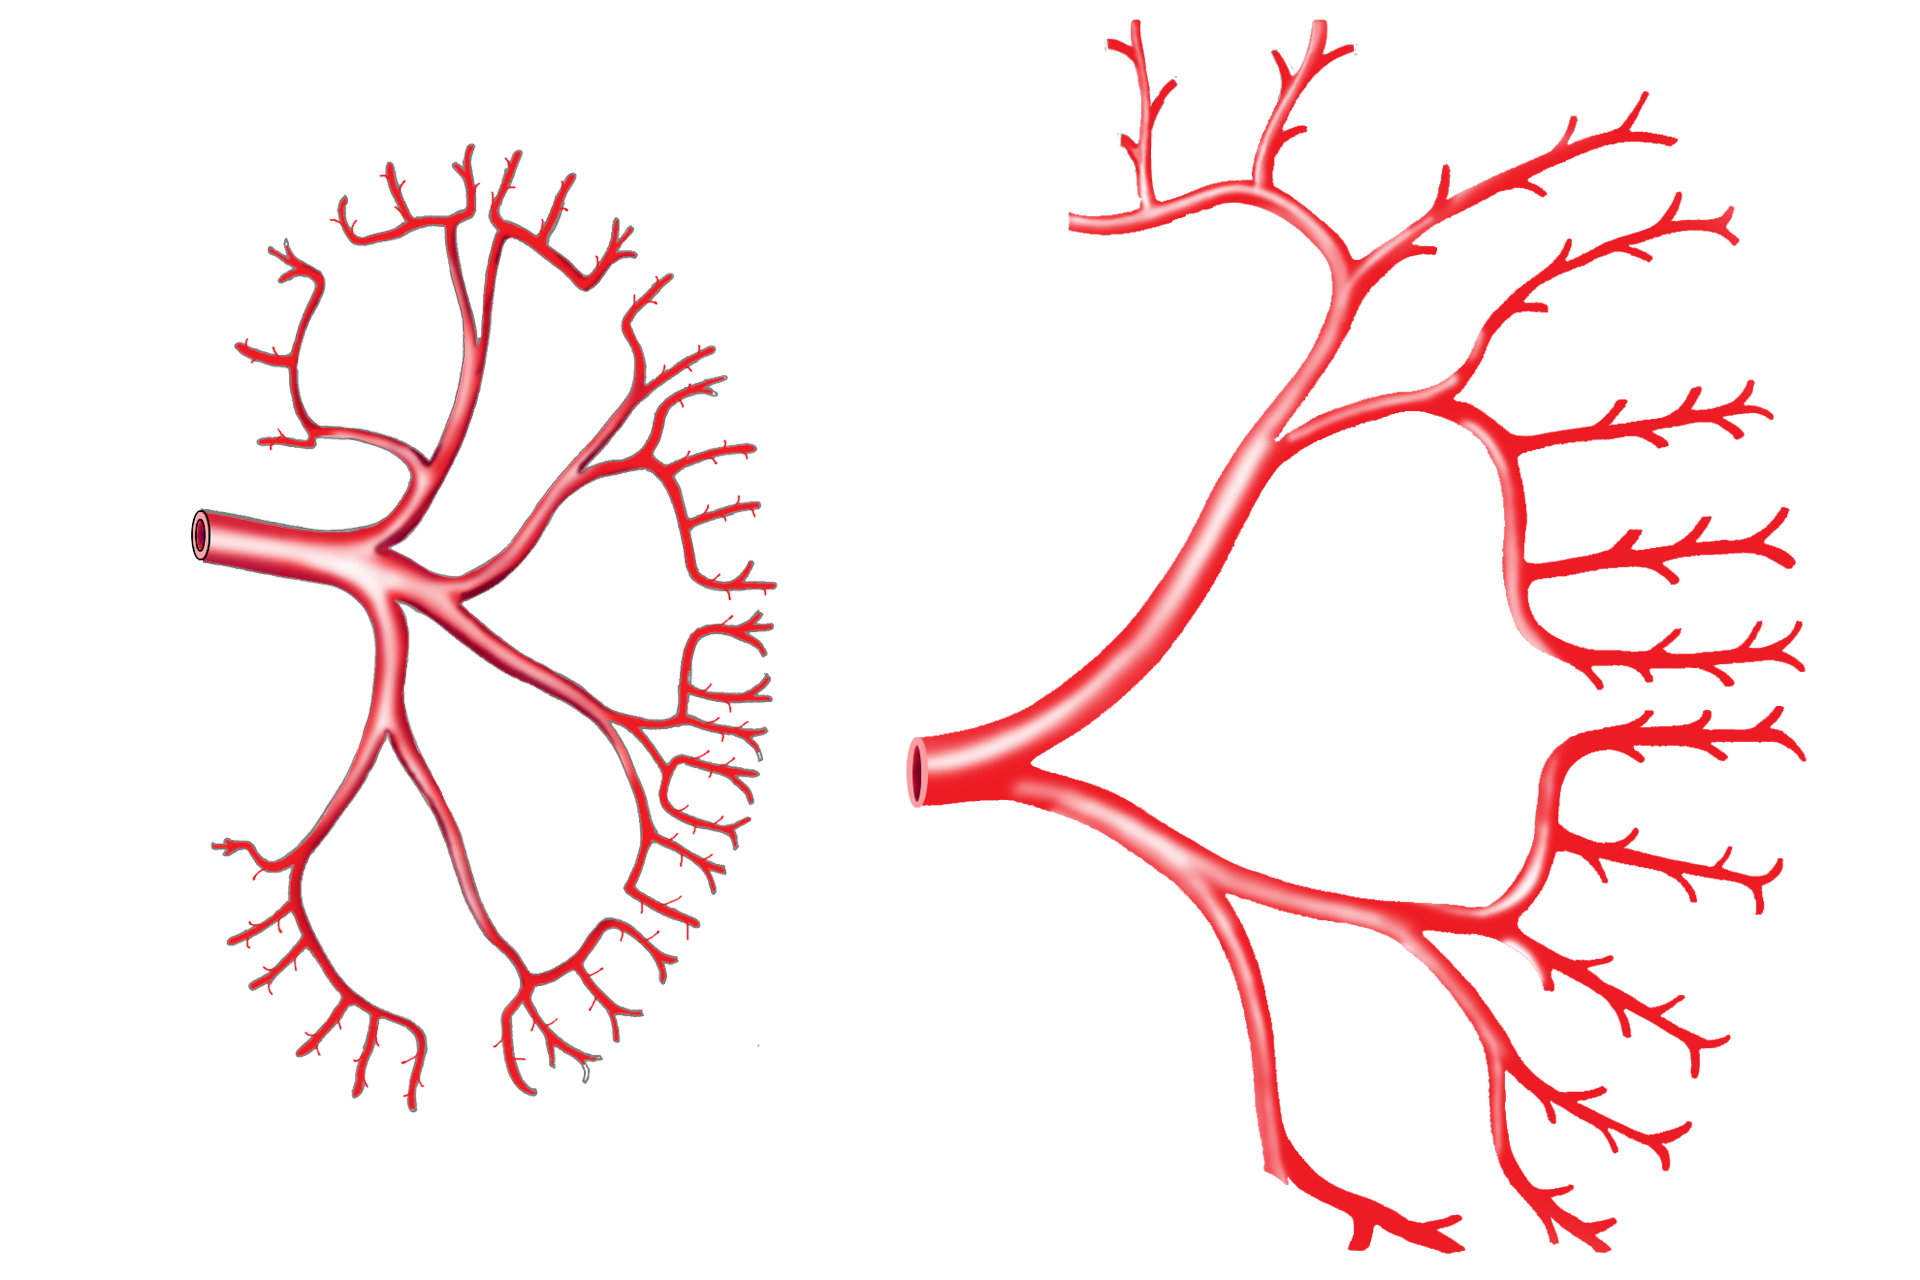 Arterial supply > <p>The arterial supply to the kidney is substantial and complex.  The renal artery, a branch of the abdominal aorta, enters at the hilum of the kidney. The renal artery supplies the interlobar, arcuate and interlobular arteries, in that order.</p>
